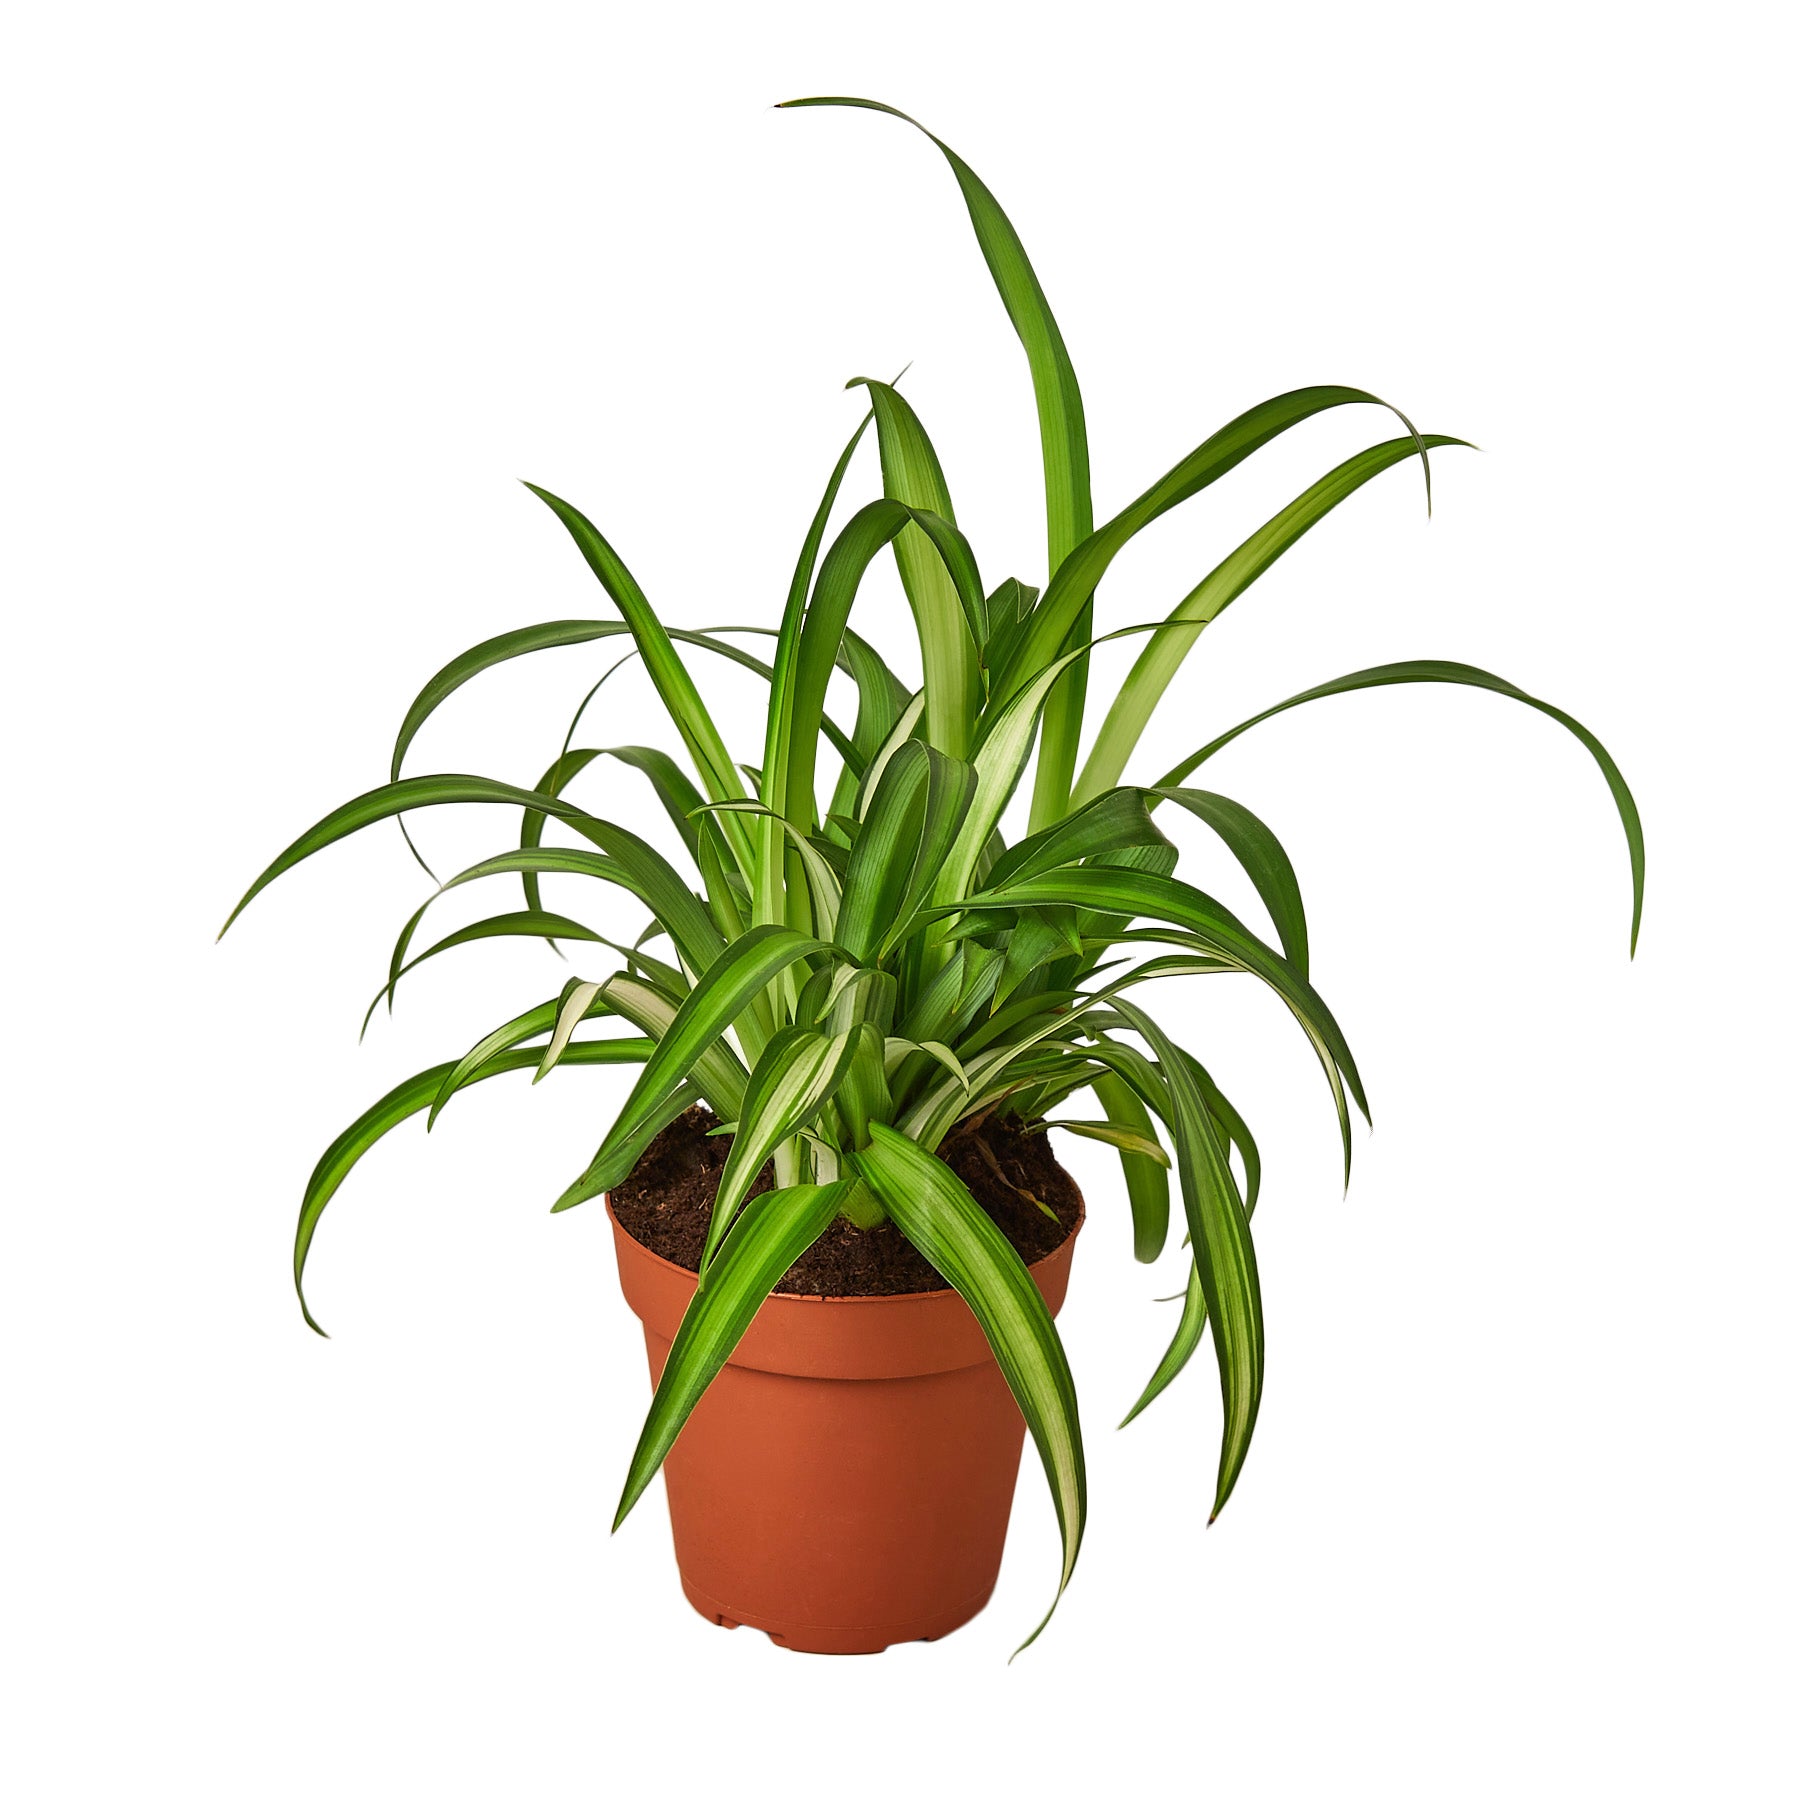 A potted plant on a white background at a garden center.